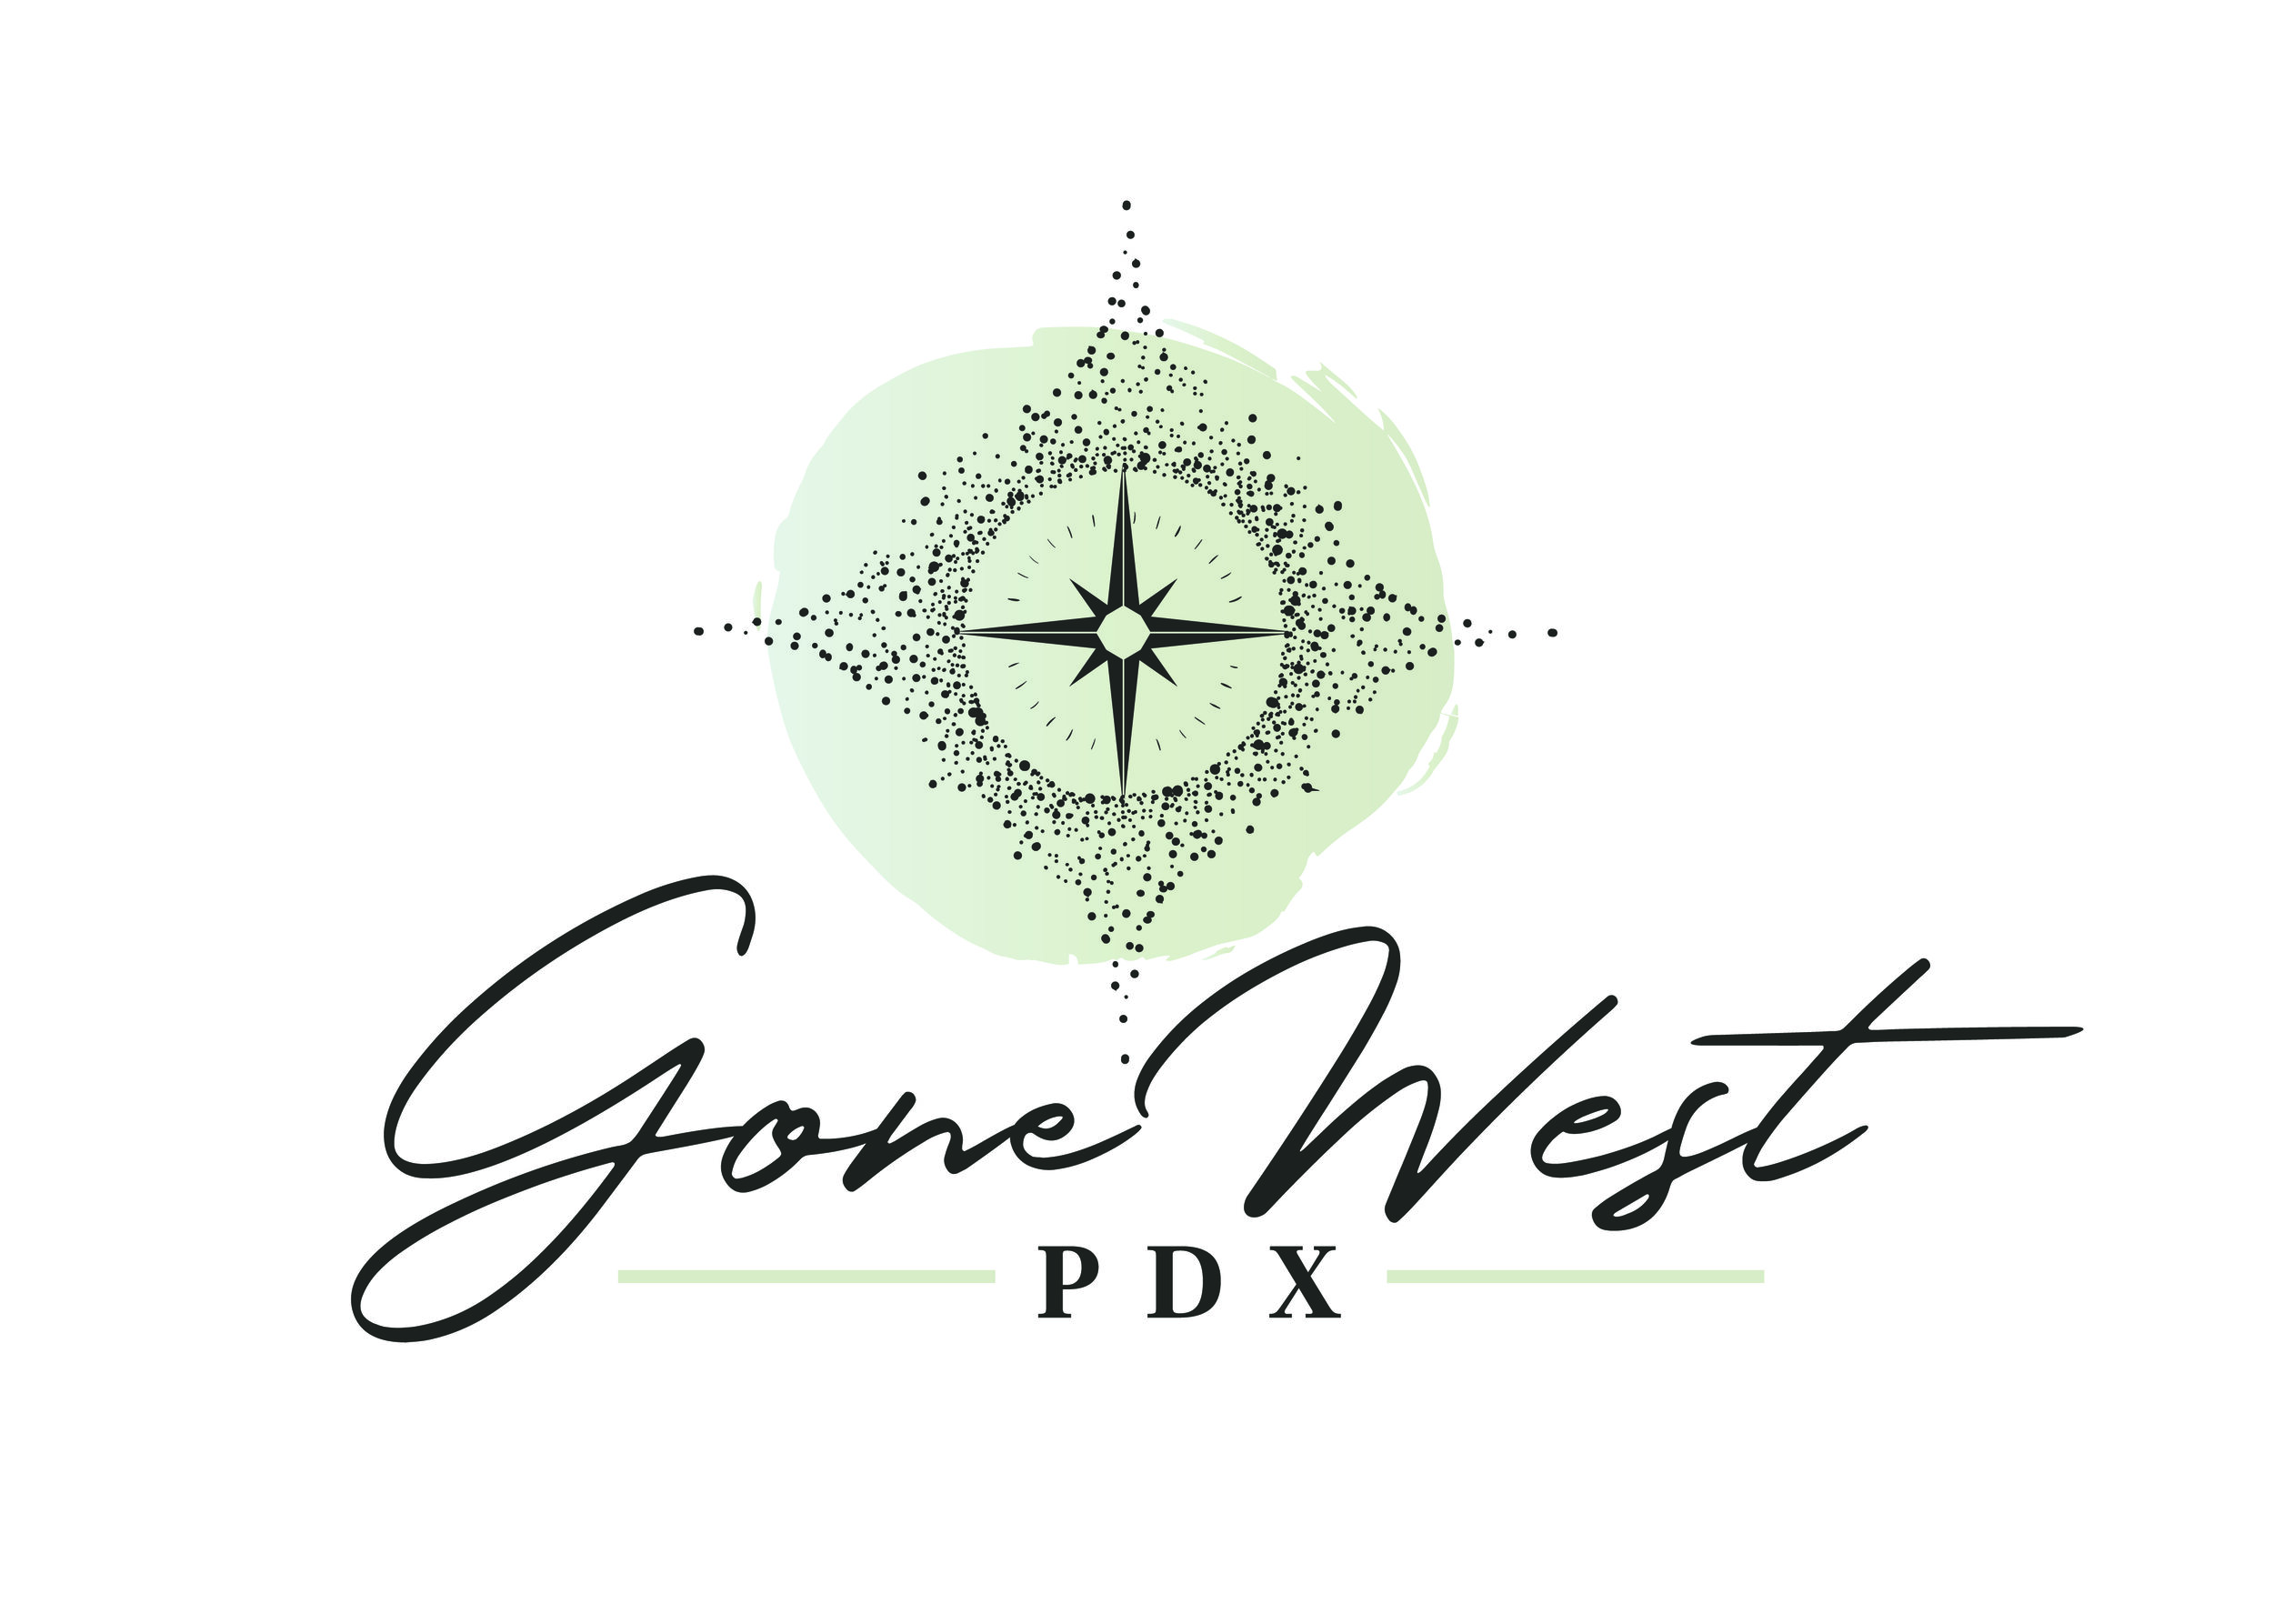 Gone West PDX 